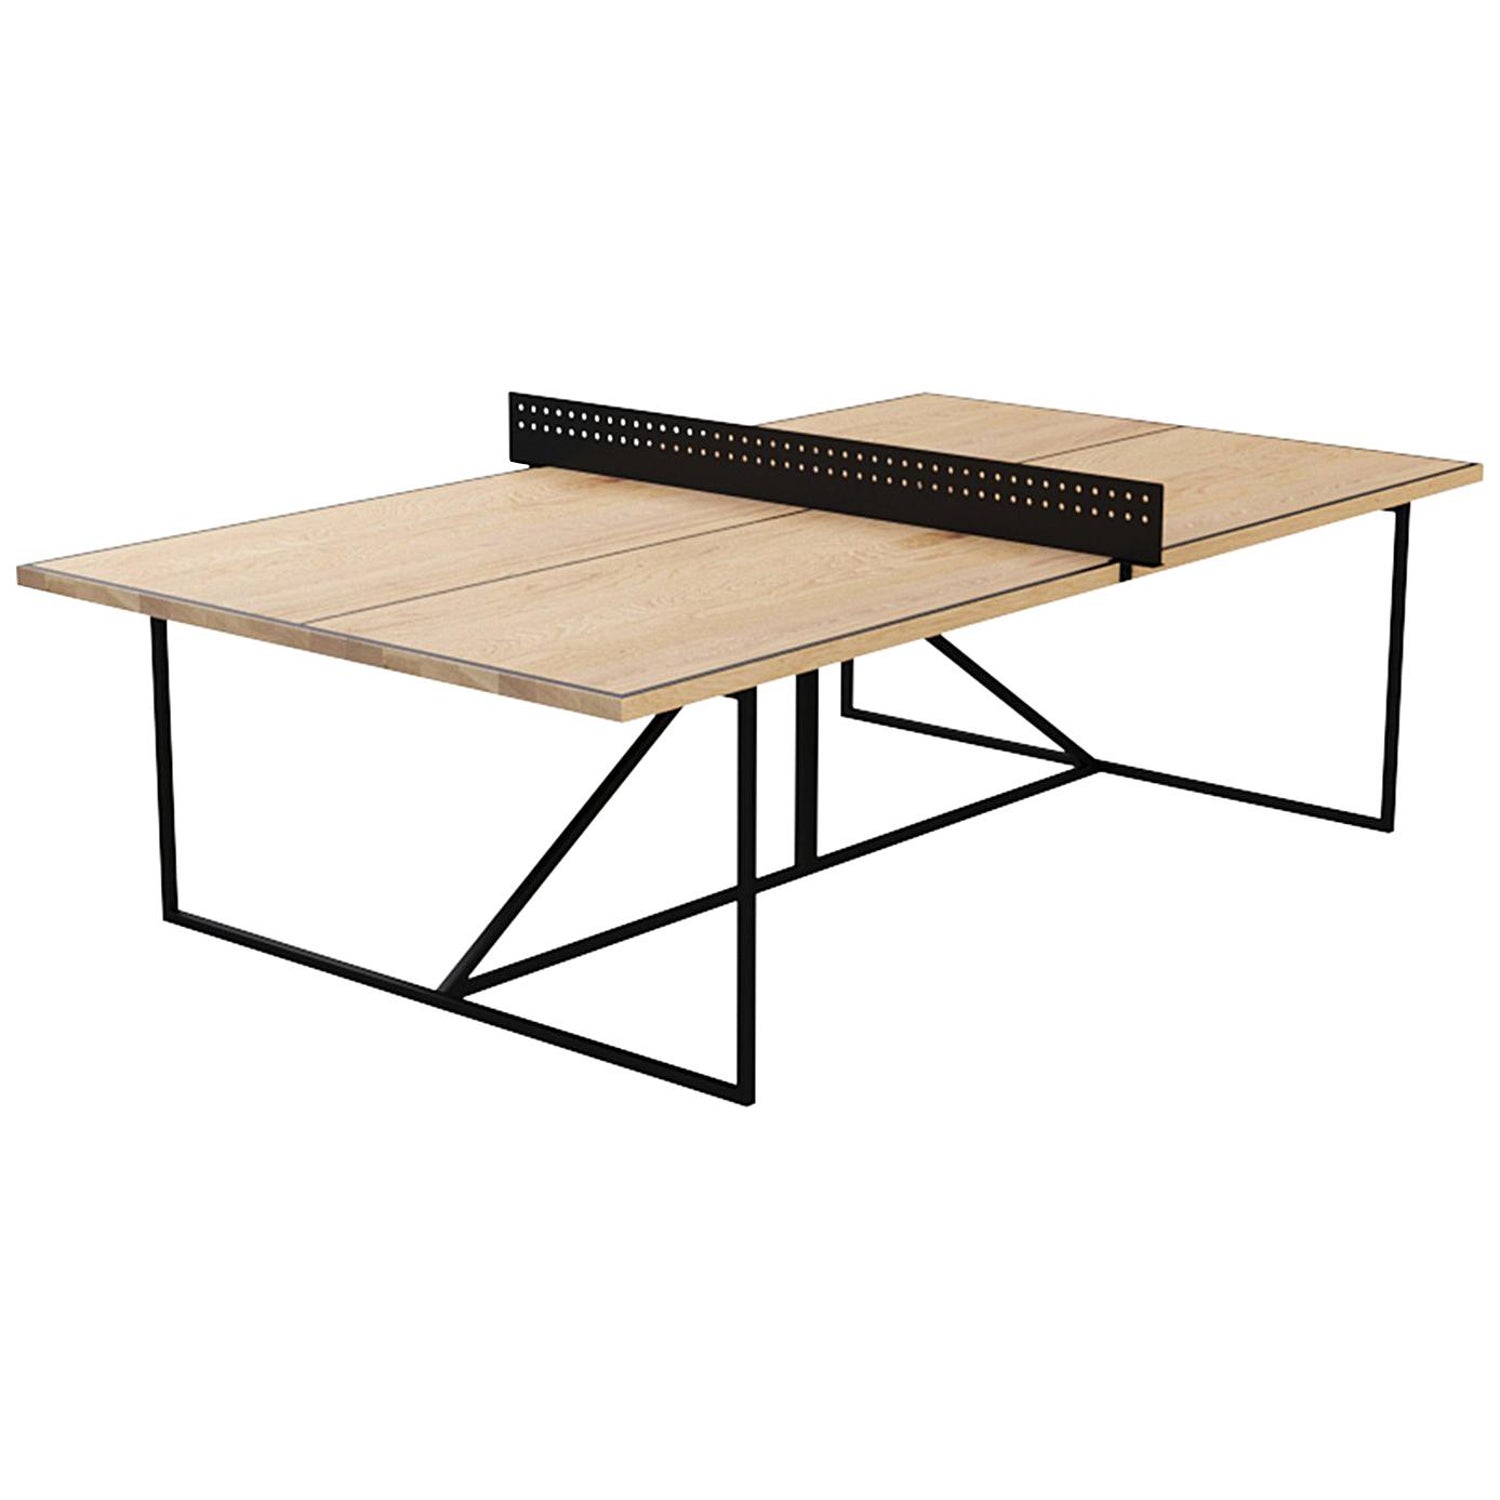 Customizable Modern The Break Ping Pong Table For Sale At 1stdibs